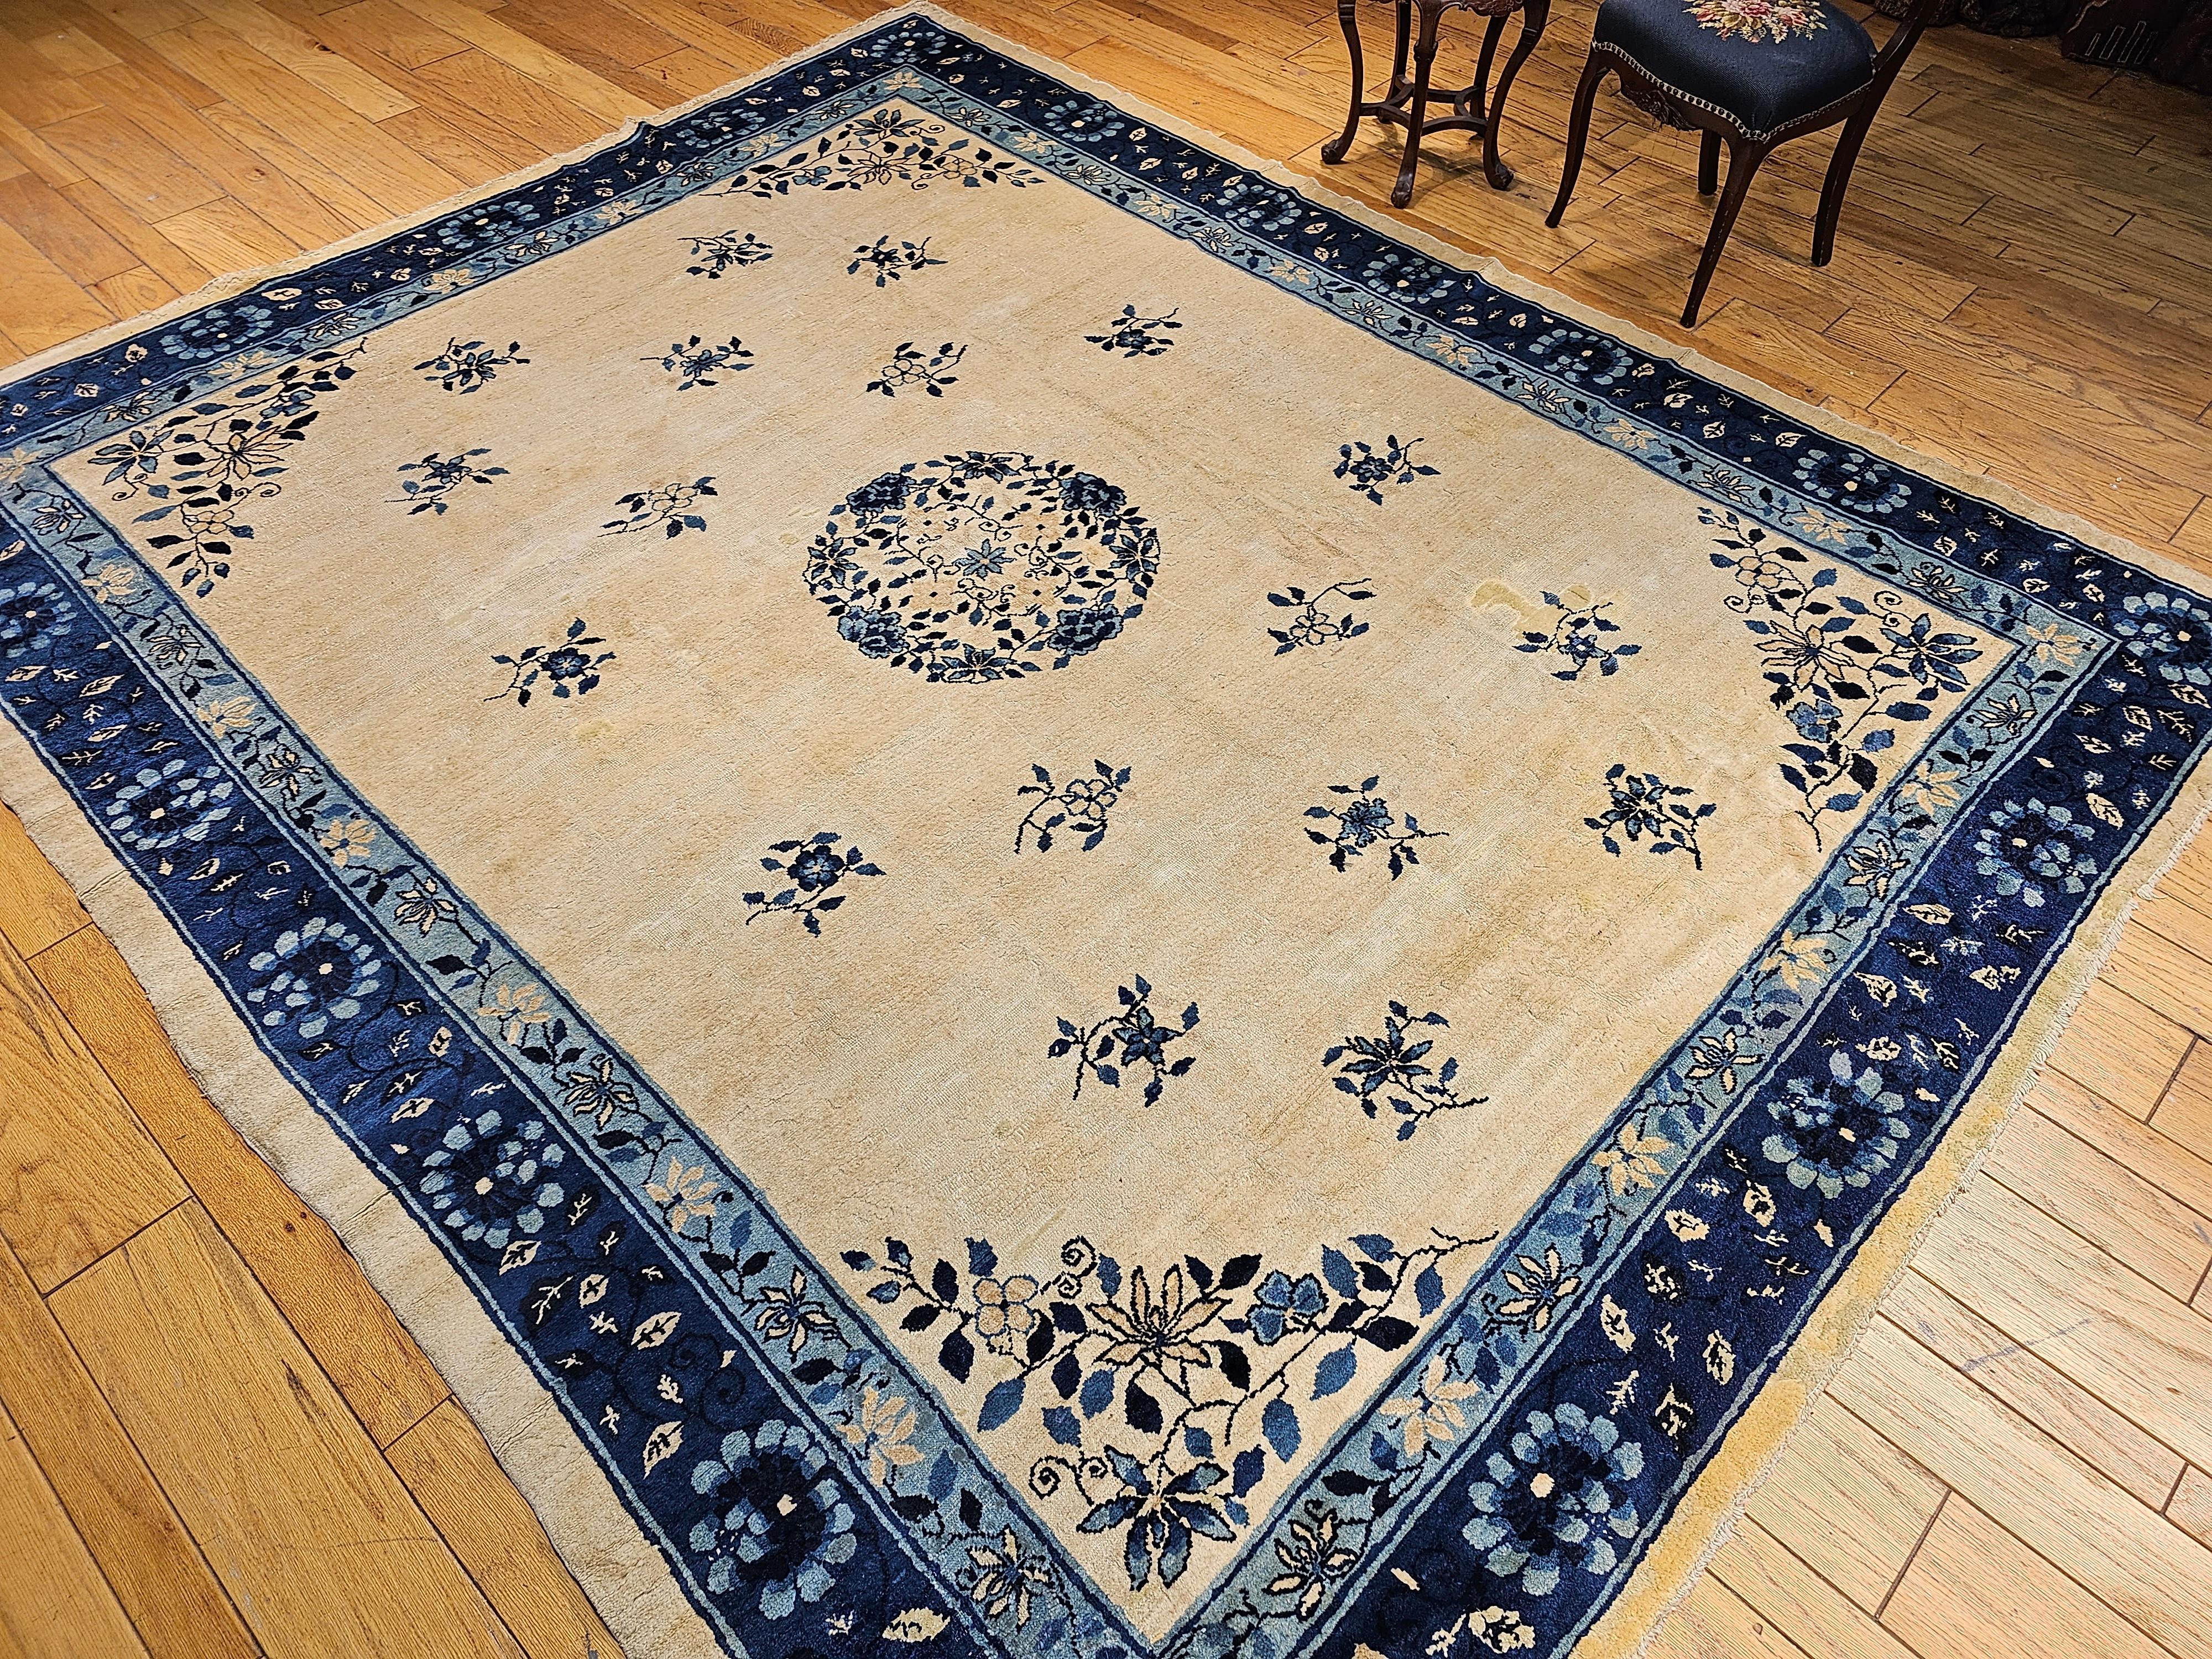 19th Century Room Size Chinese Peking Rug in Ivory, Navy, Baby Blue For Sale 7